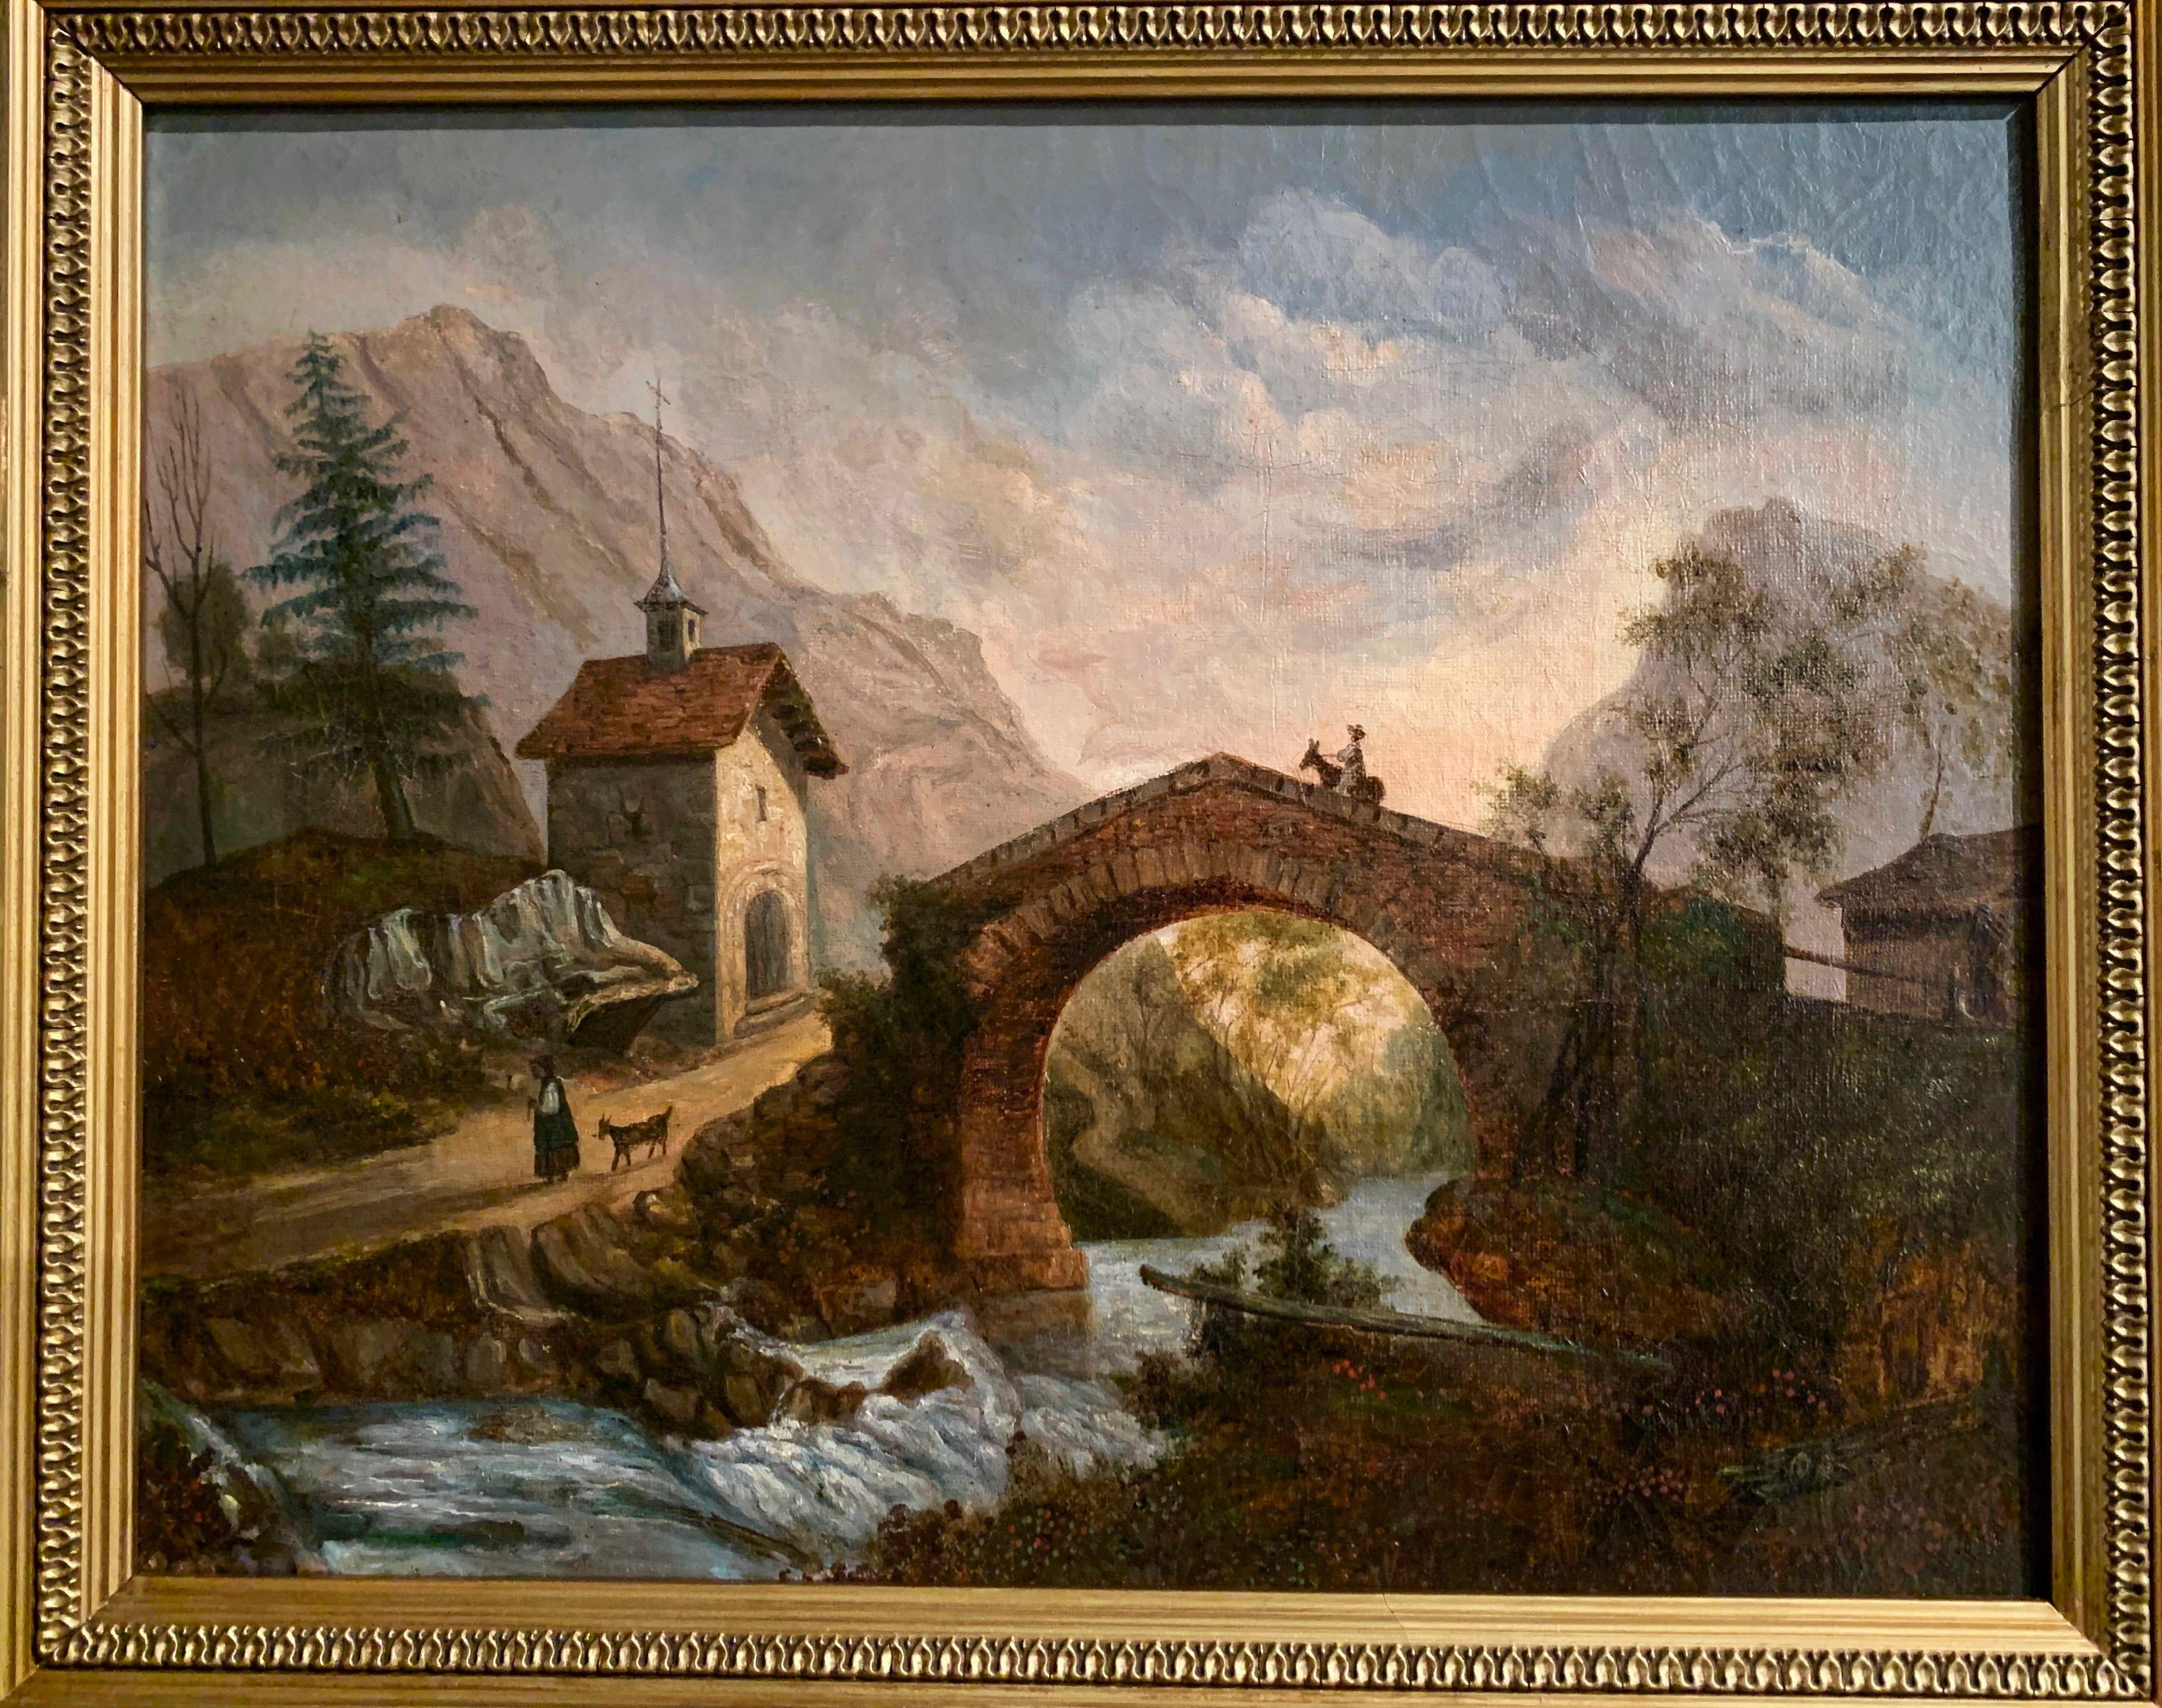 This elegant antique painting was created in France, circa 1890; set in a carved giltwood frame, the artwork depicts a landscape scene in the mountains with a village and a bridge in the foreground. The canvas has been relined, is in excellent